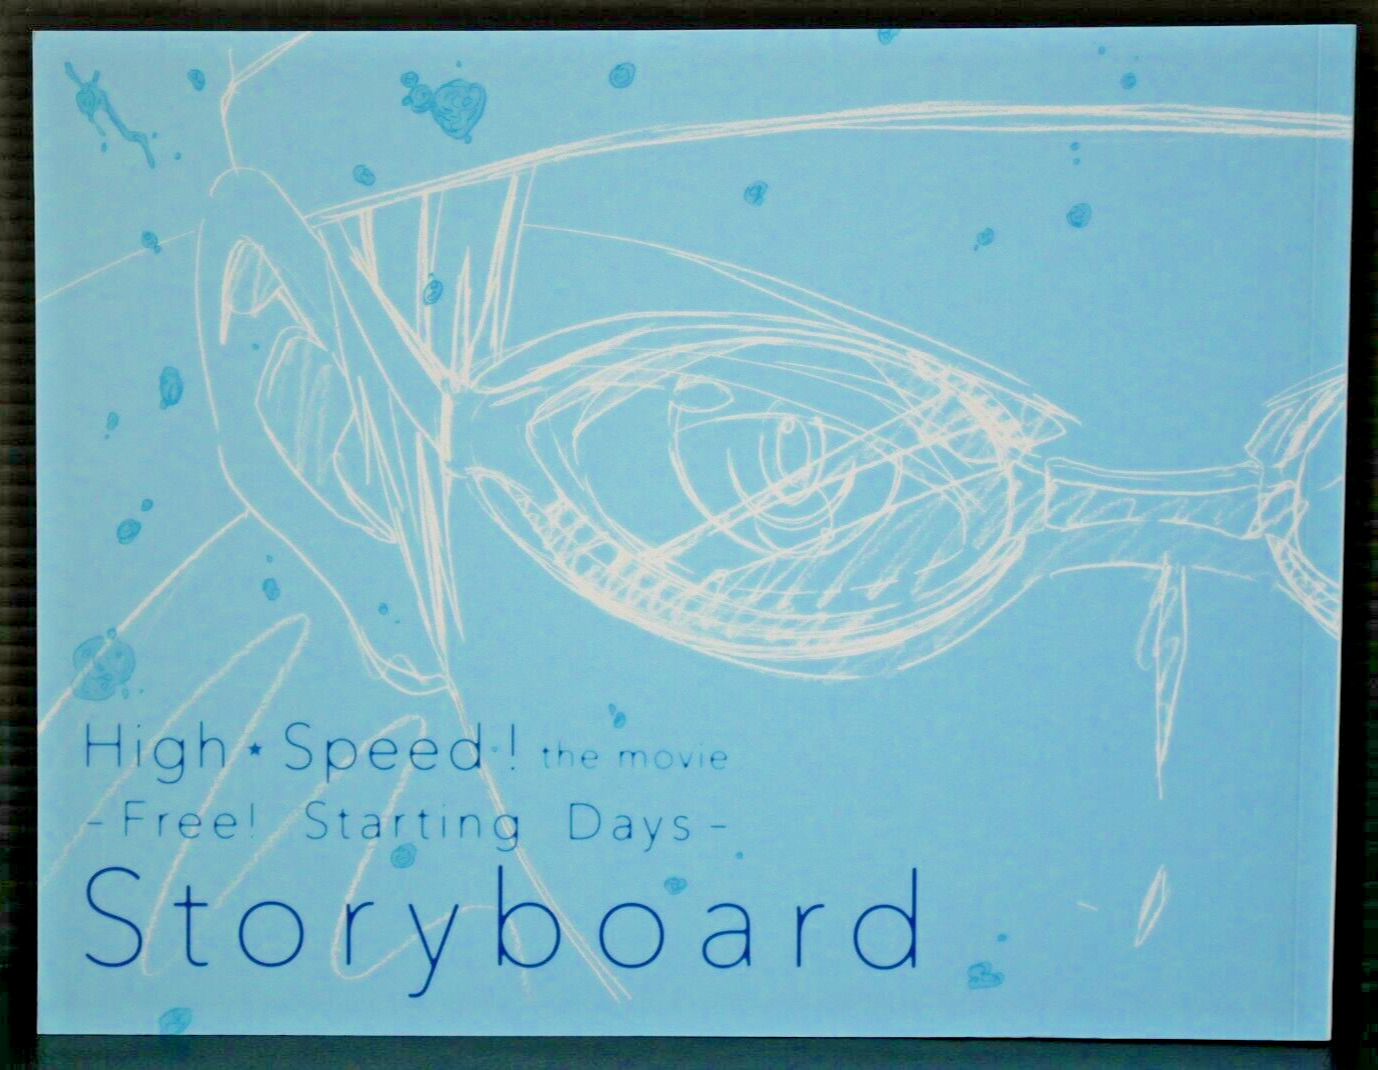 High Speed the movie Free Starting Days Storyboard (Book) - from JAPAN